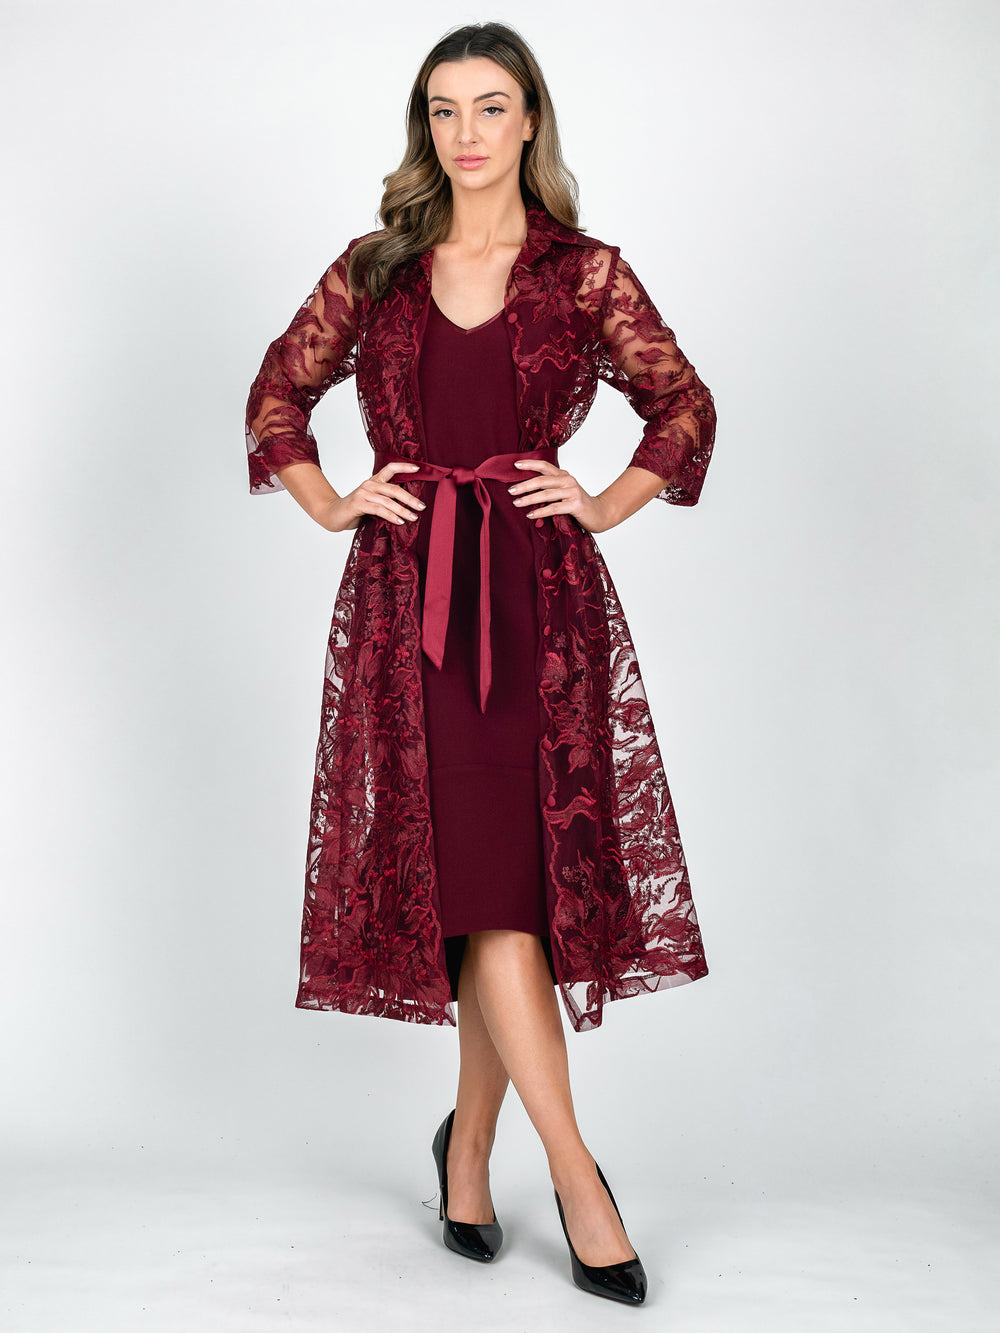 Lisa Barron burgundy red A-line lace coat dress with 3/4 length sleeves in a leaf and botanical embroidery worn over plain v-neck dress